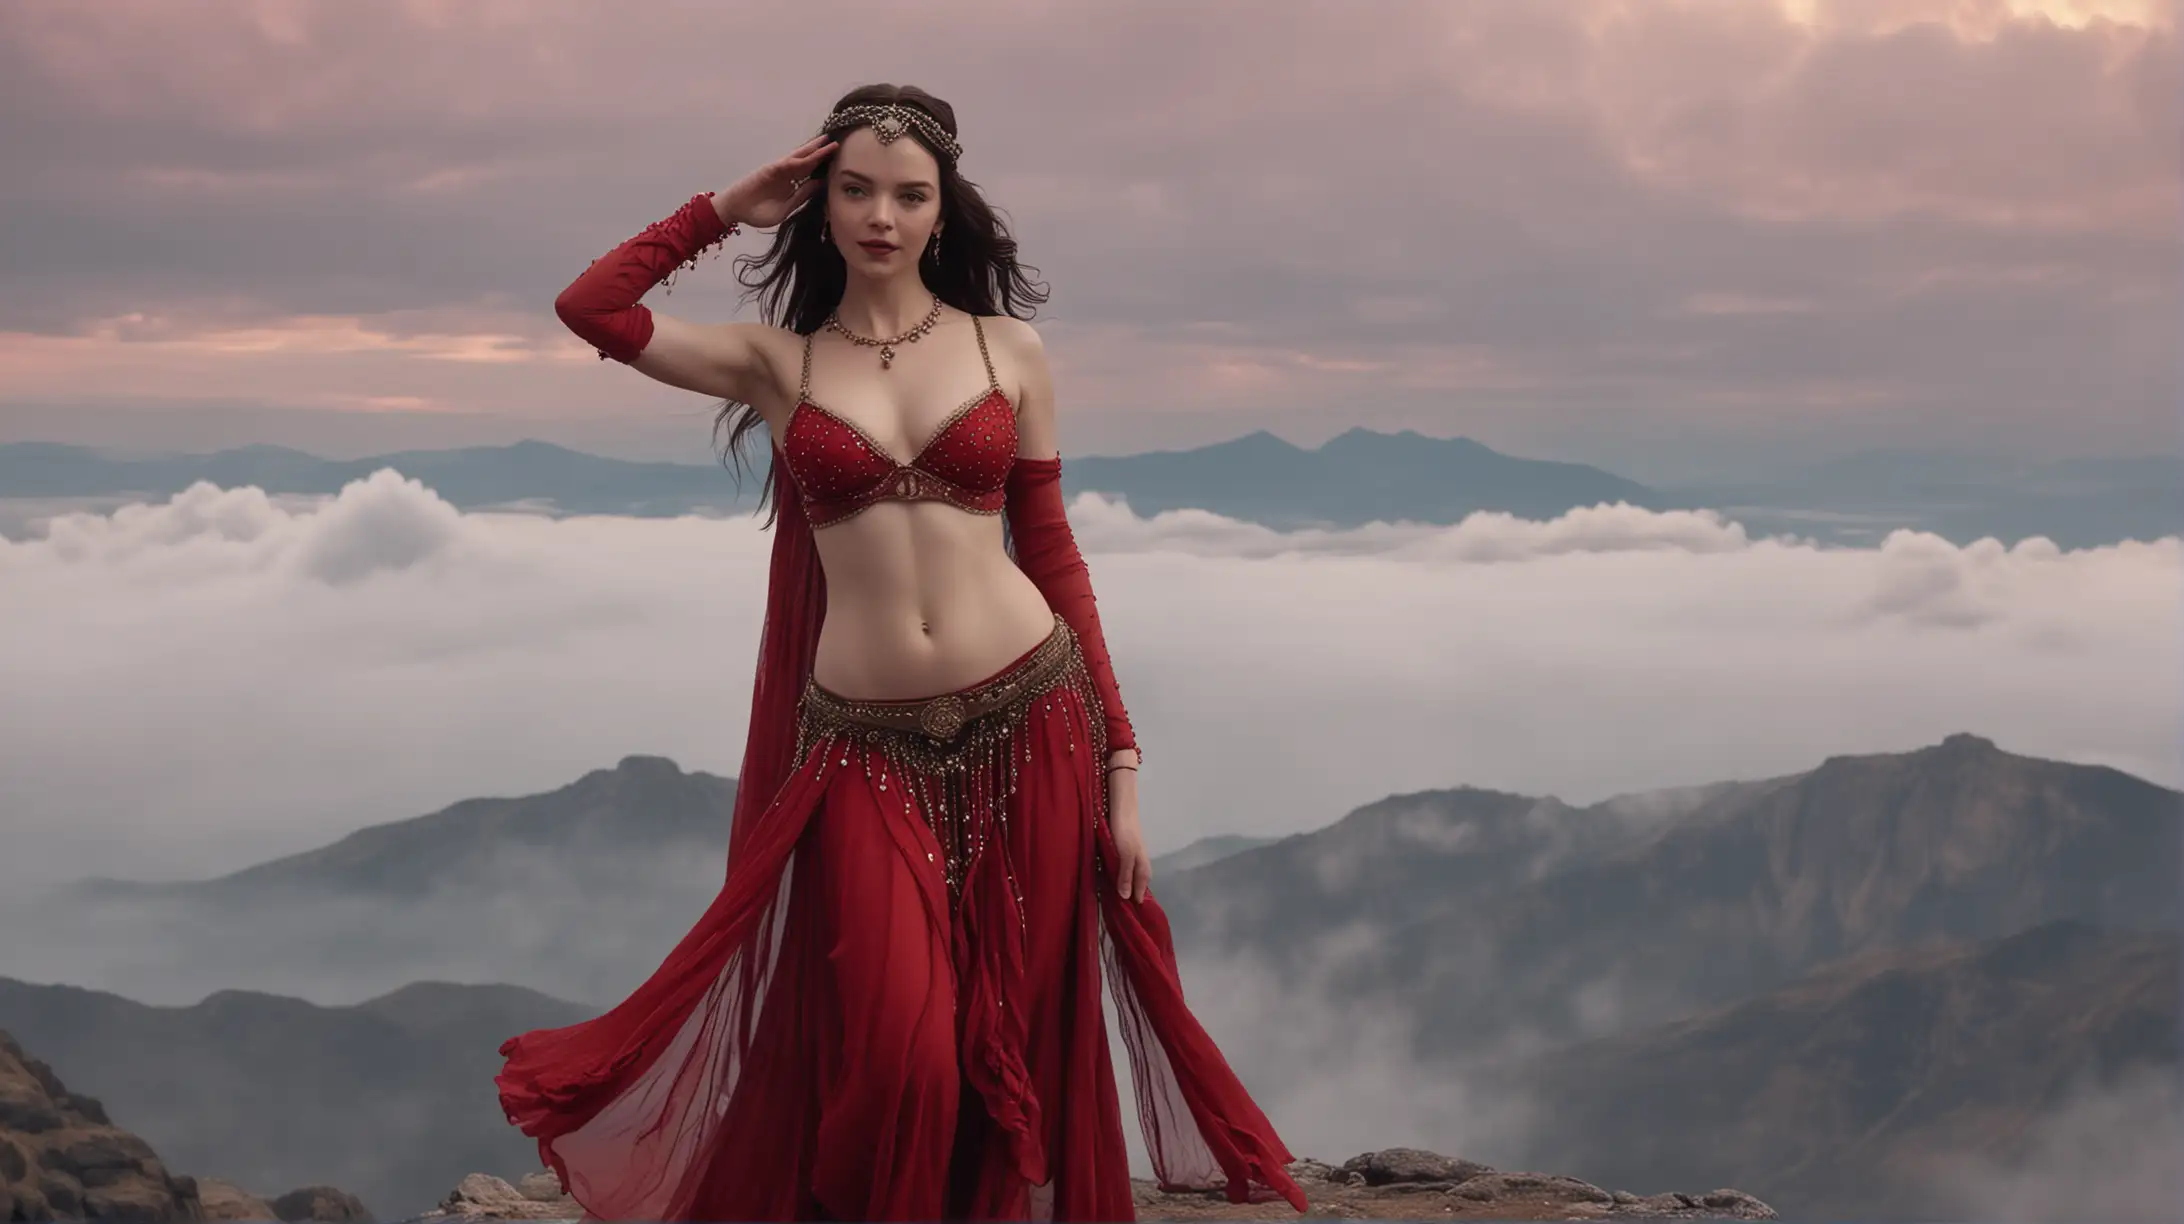 Anya Taylor-Joy as Sexy Belly Dancer, big boobs, smile, red clothes,on top of a mountain, clouds, fog